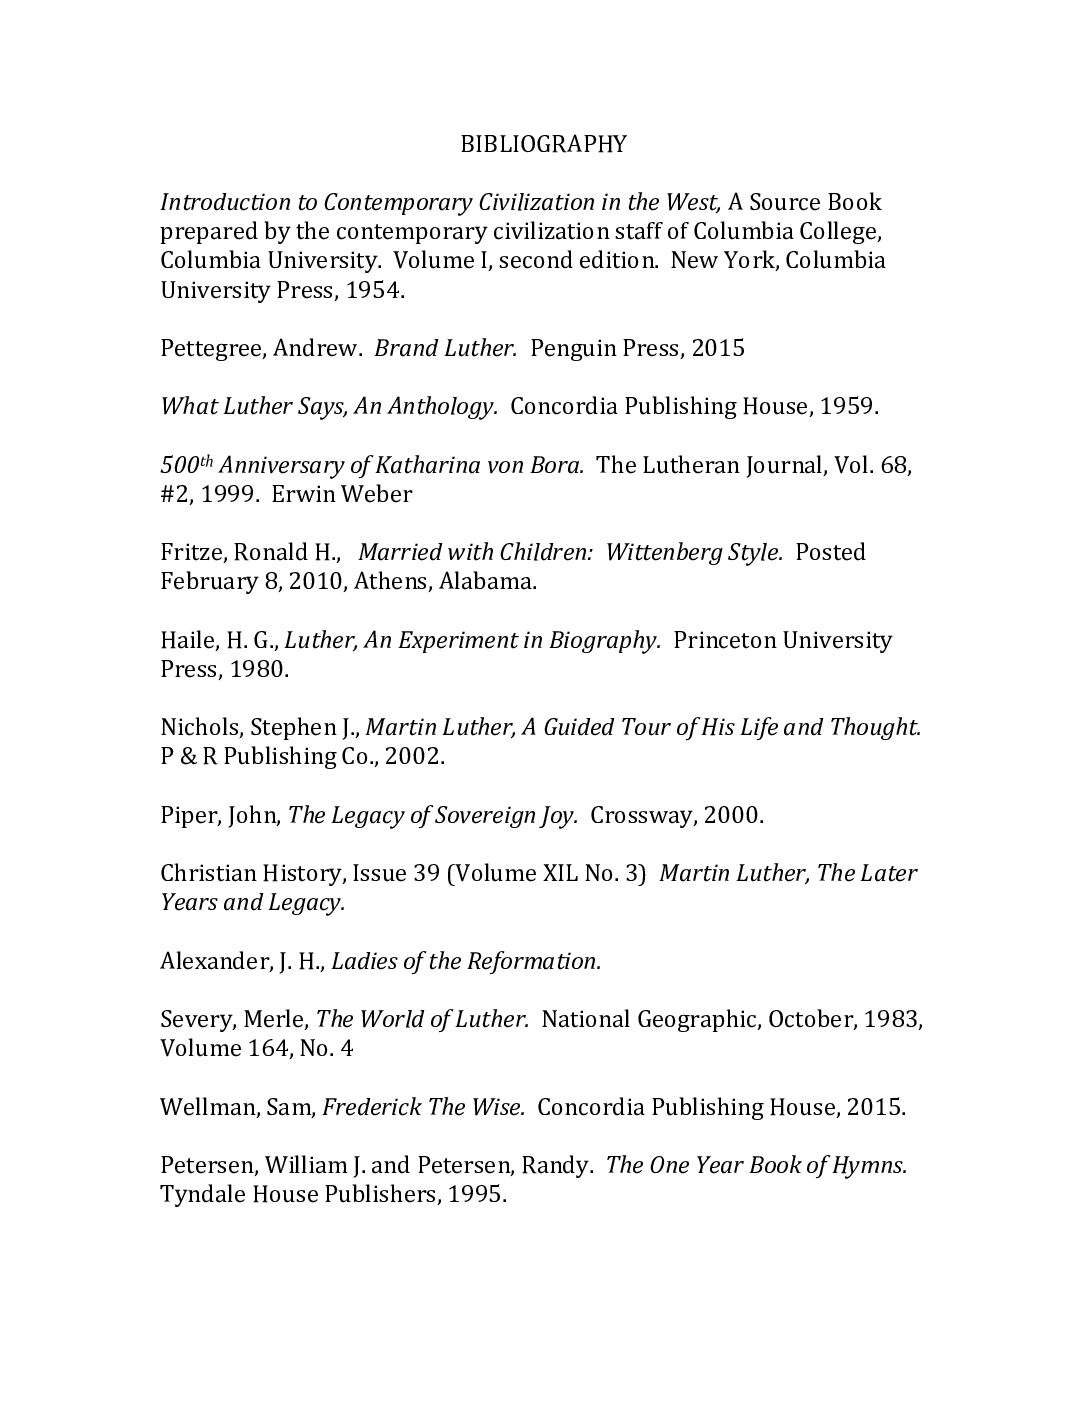 Page 1 LUTHER BIBLIOGRAPHY